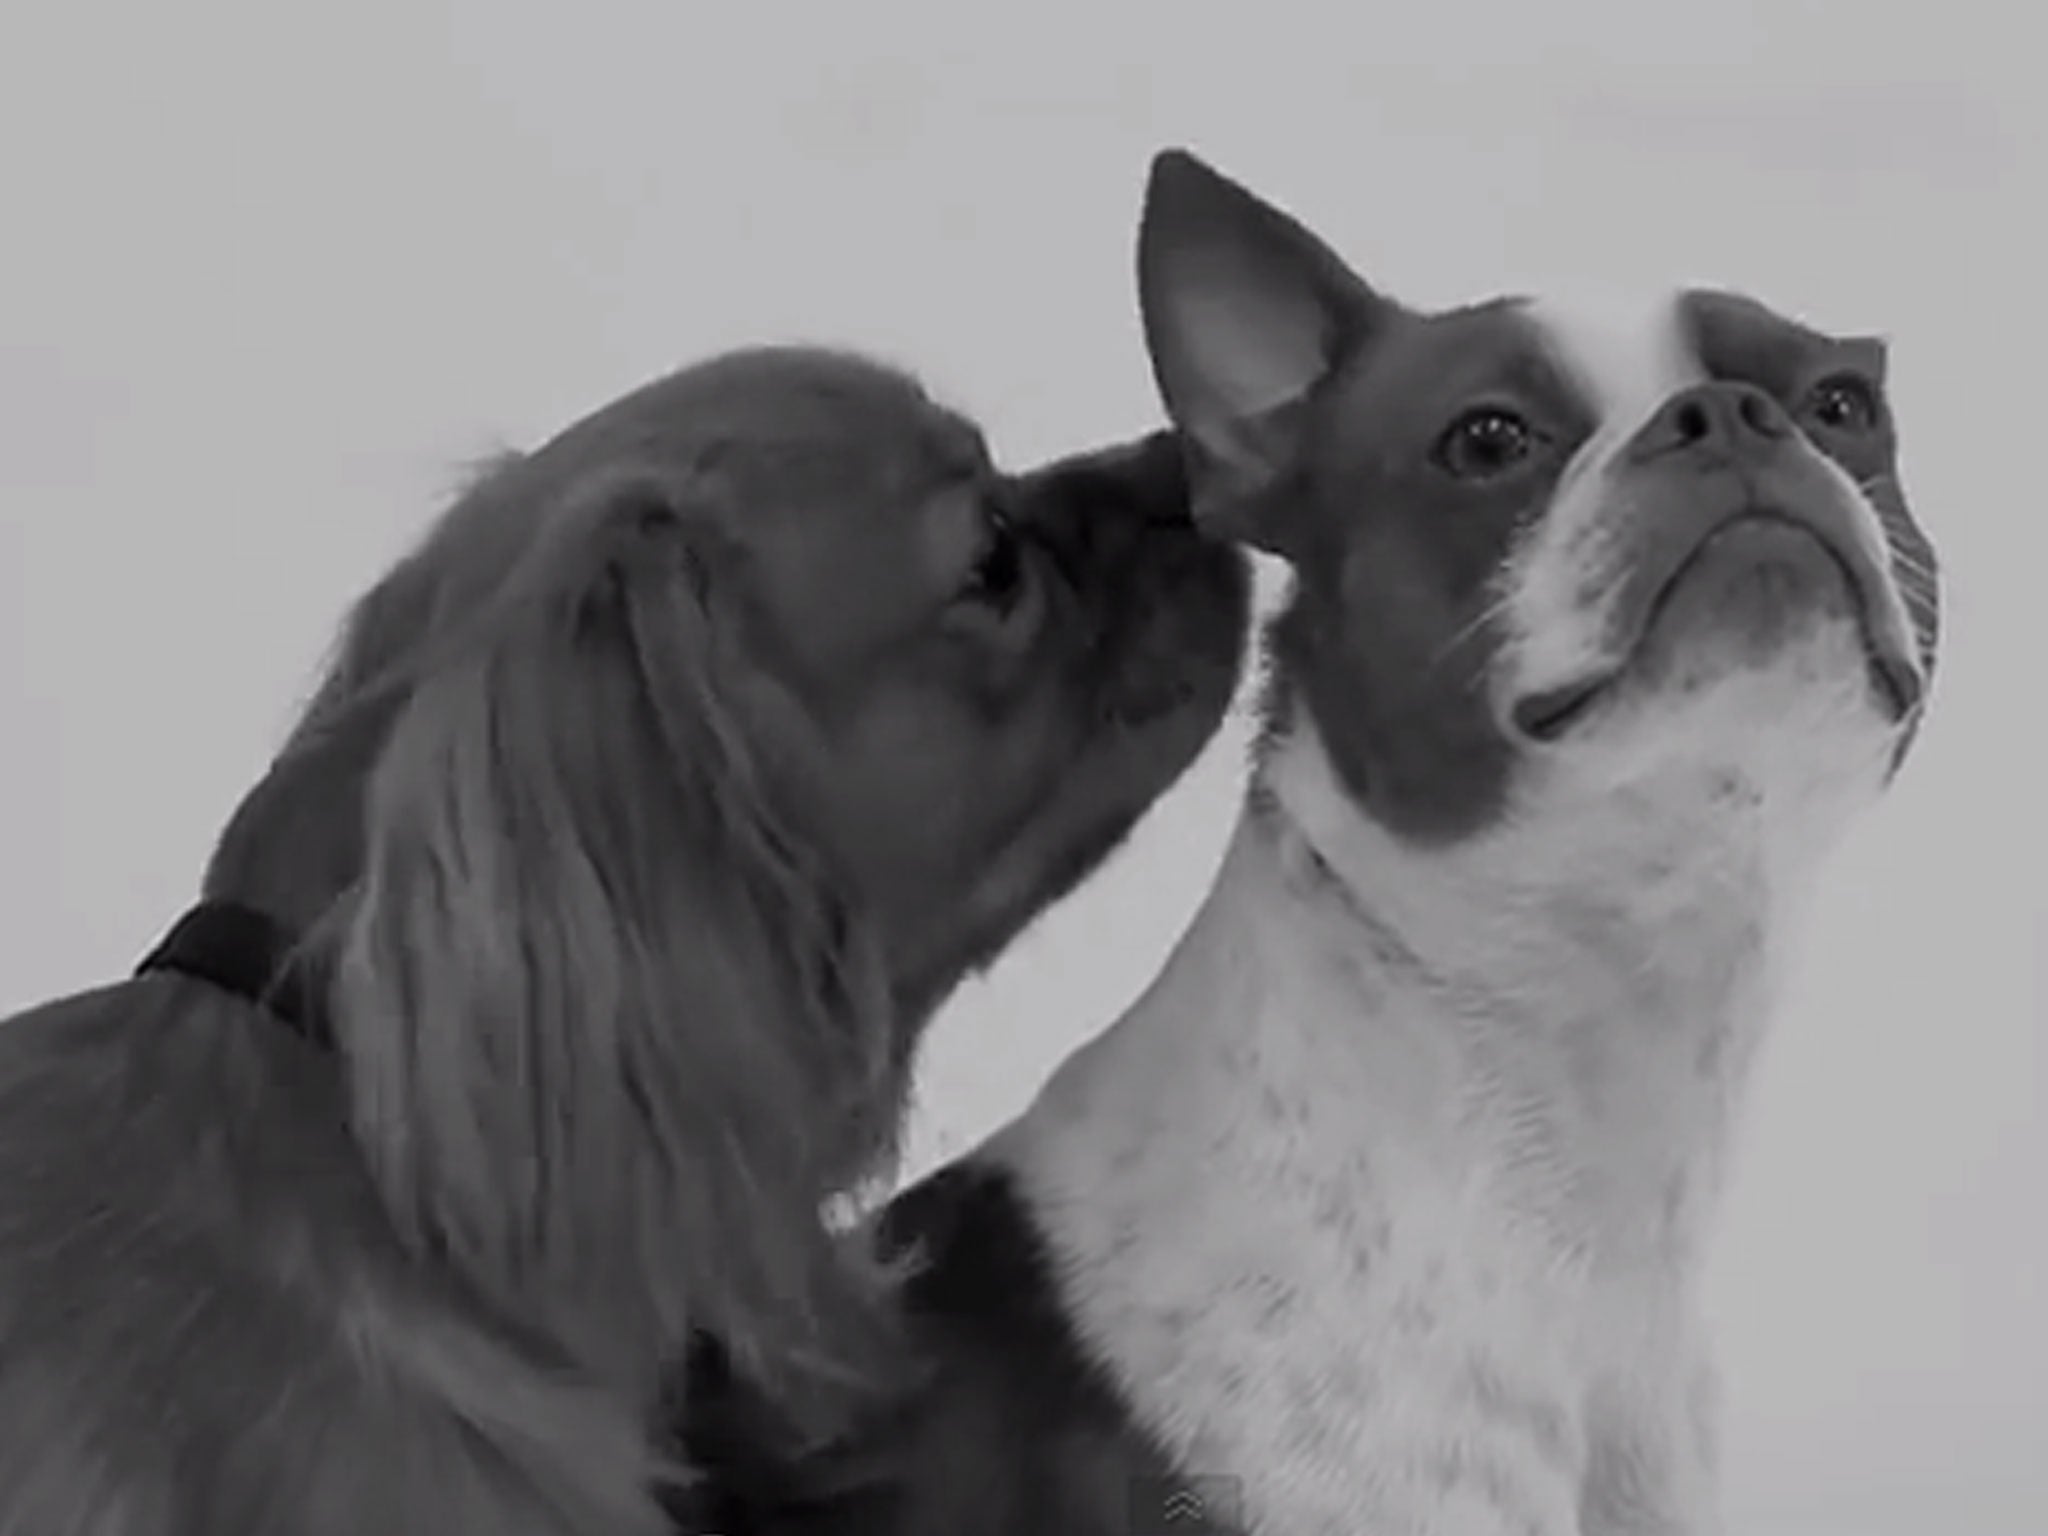 Two dogs meet for the first time in 'First Sniff', a video parody of 'First Kiss'